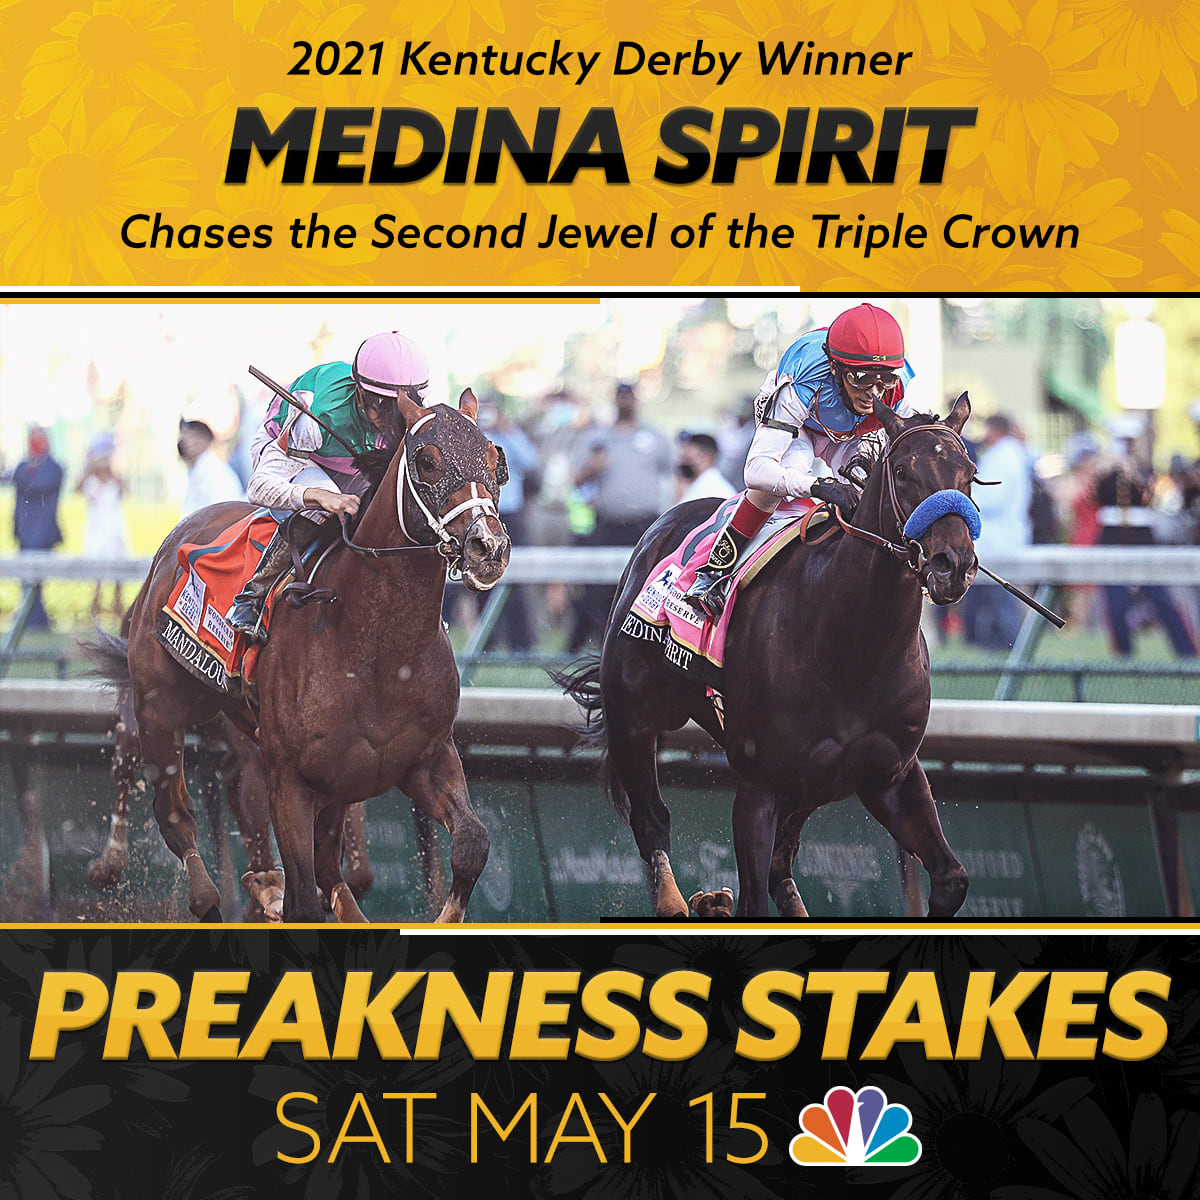 Kentucky Derby: ✅ NEXT UP: Preakness Stakes Medina Spirit will chase the Second Jewel of the Triple Crown at the @PreaknessStakes - May 15th on NBC! KyDerby |